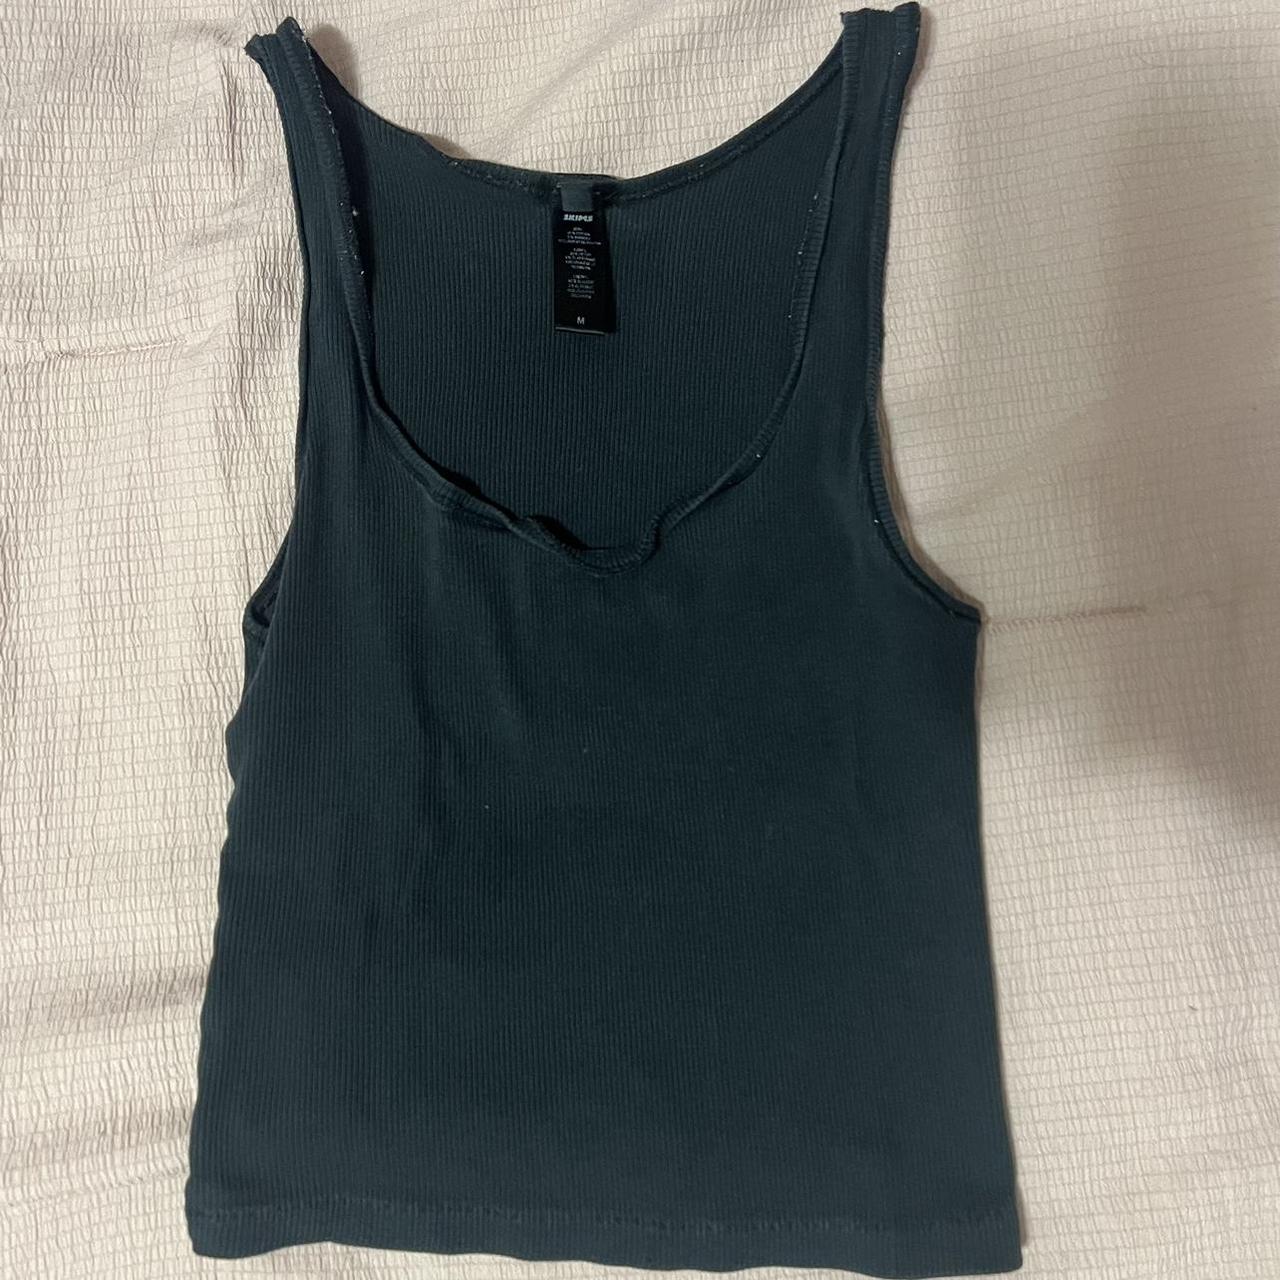 Skims tank top in a size Medium but can fit a x... - Depop